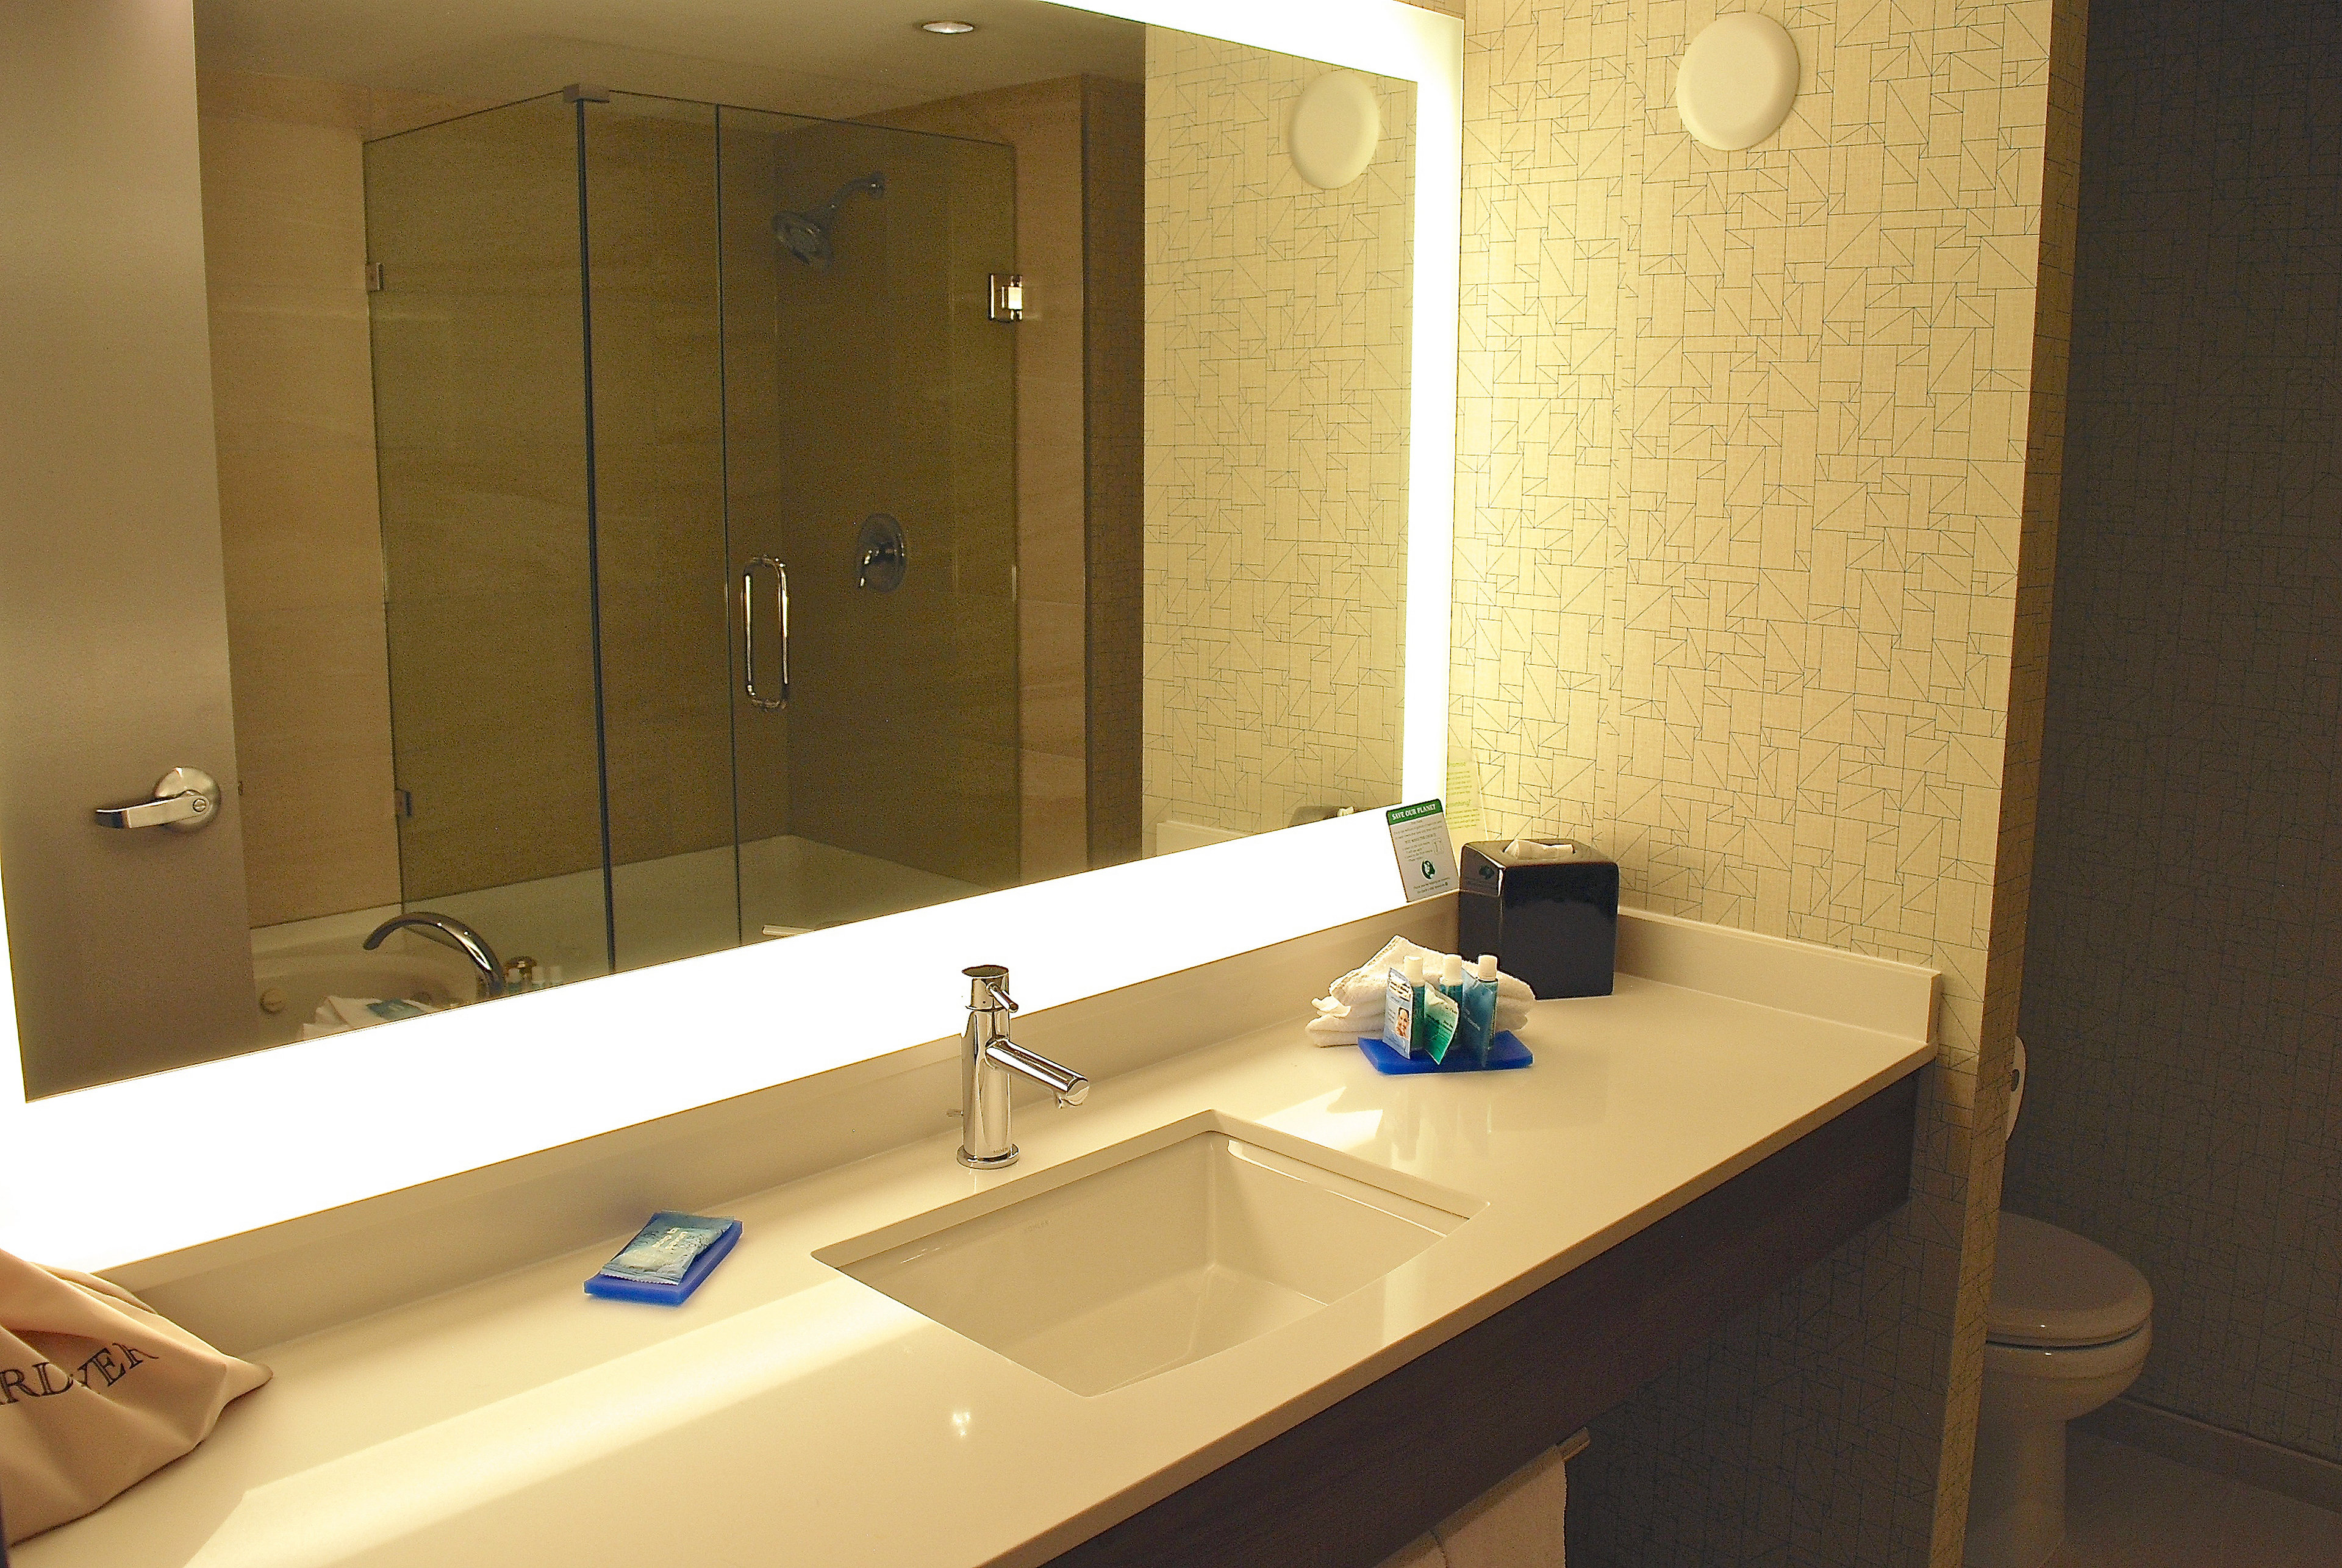 Unwind in our clean and spacious guest bathroom.